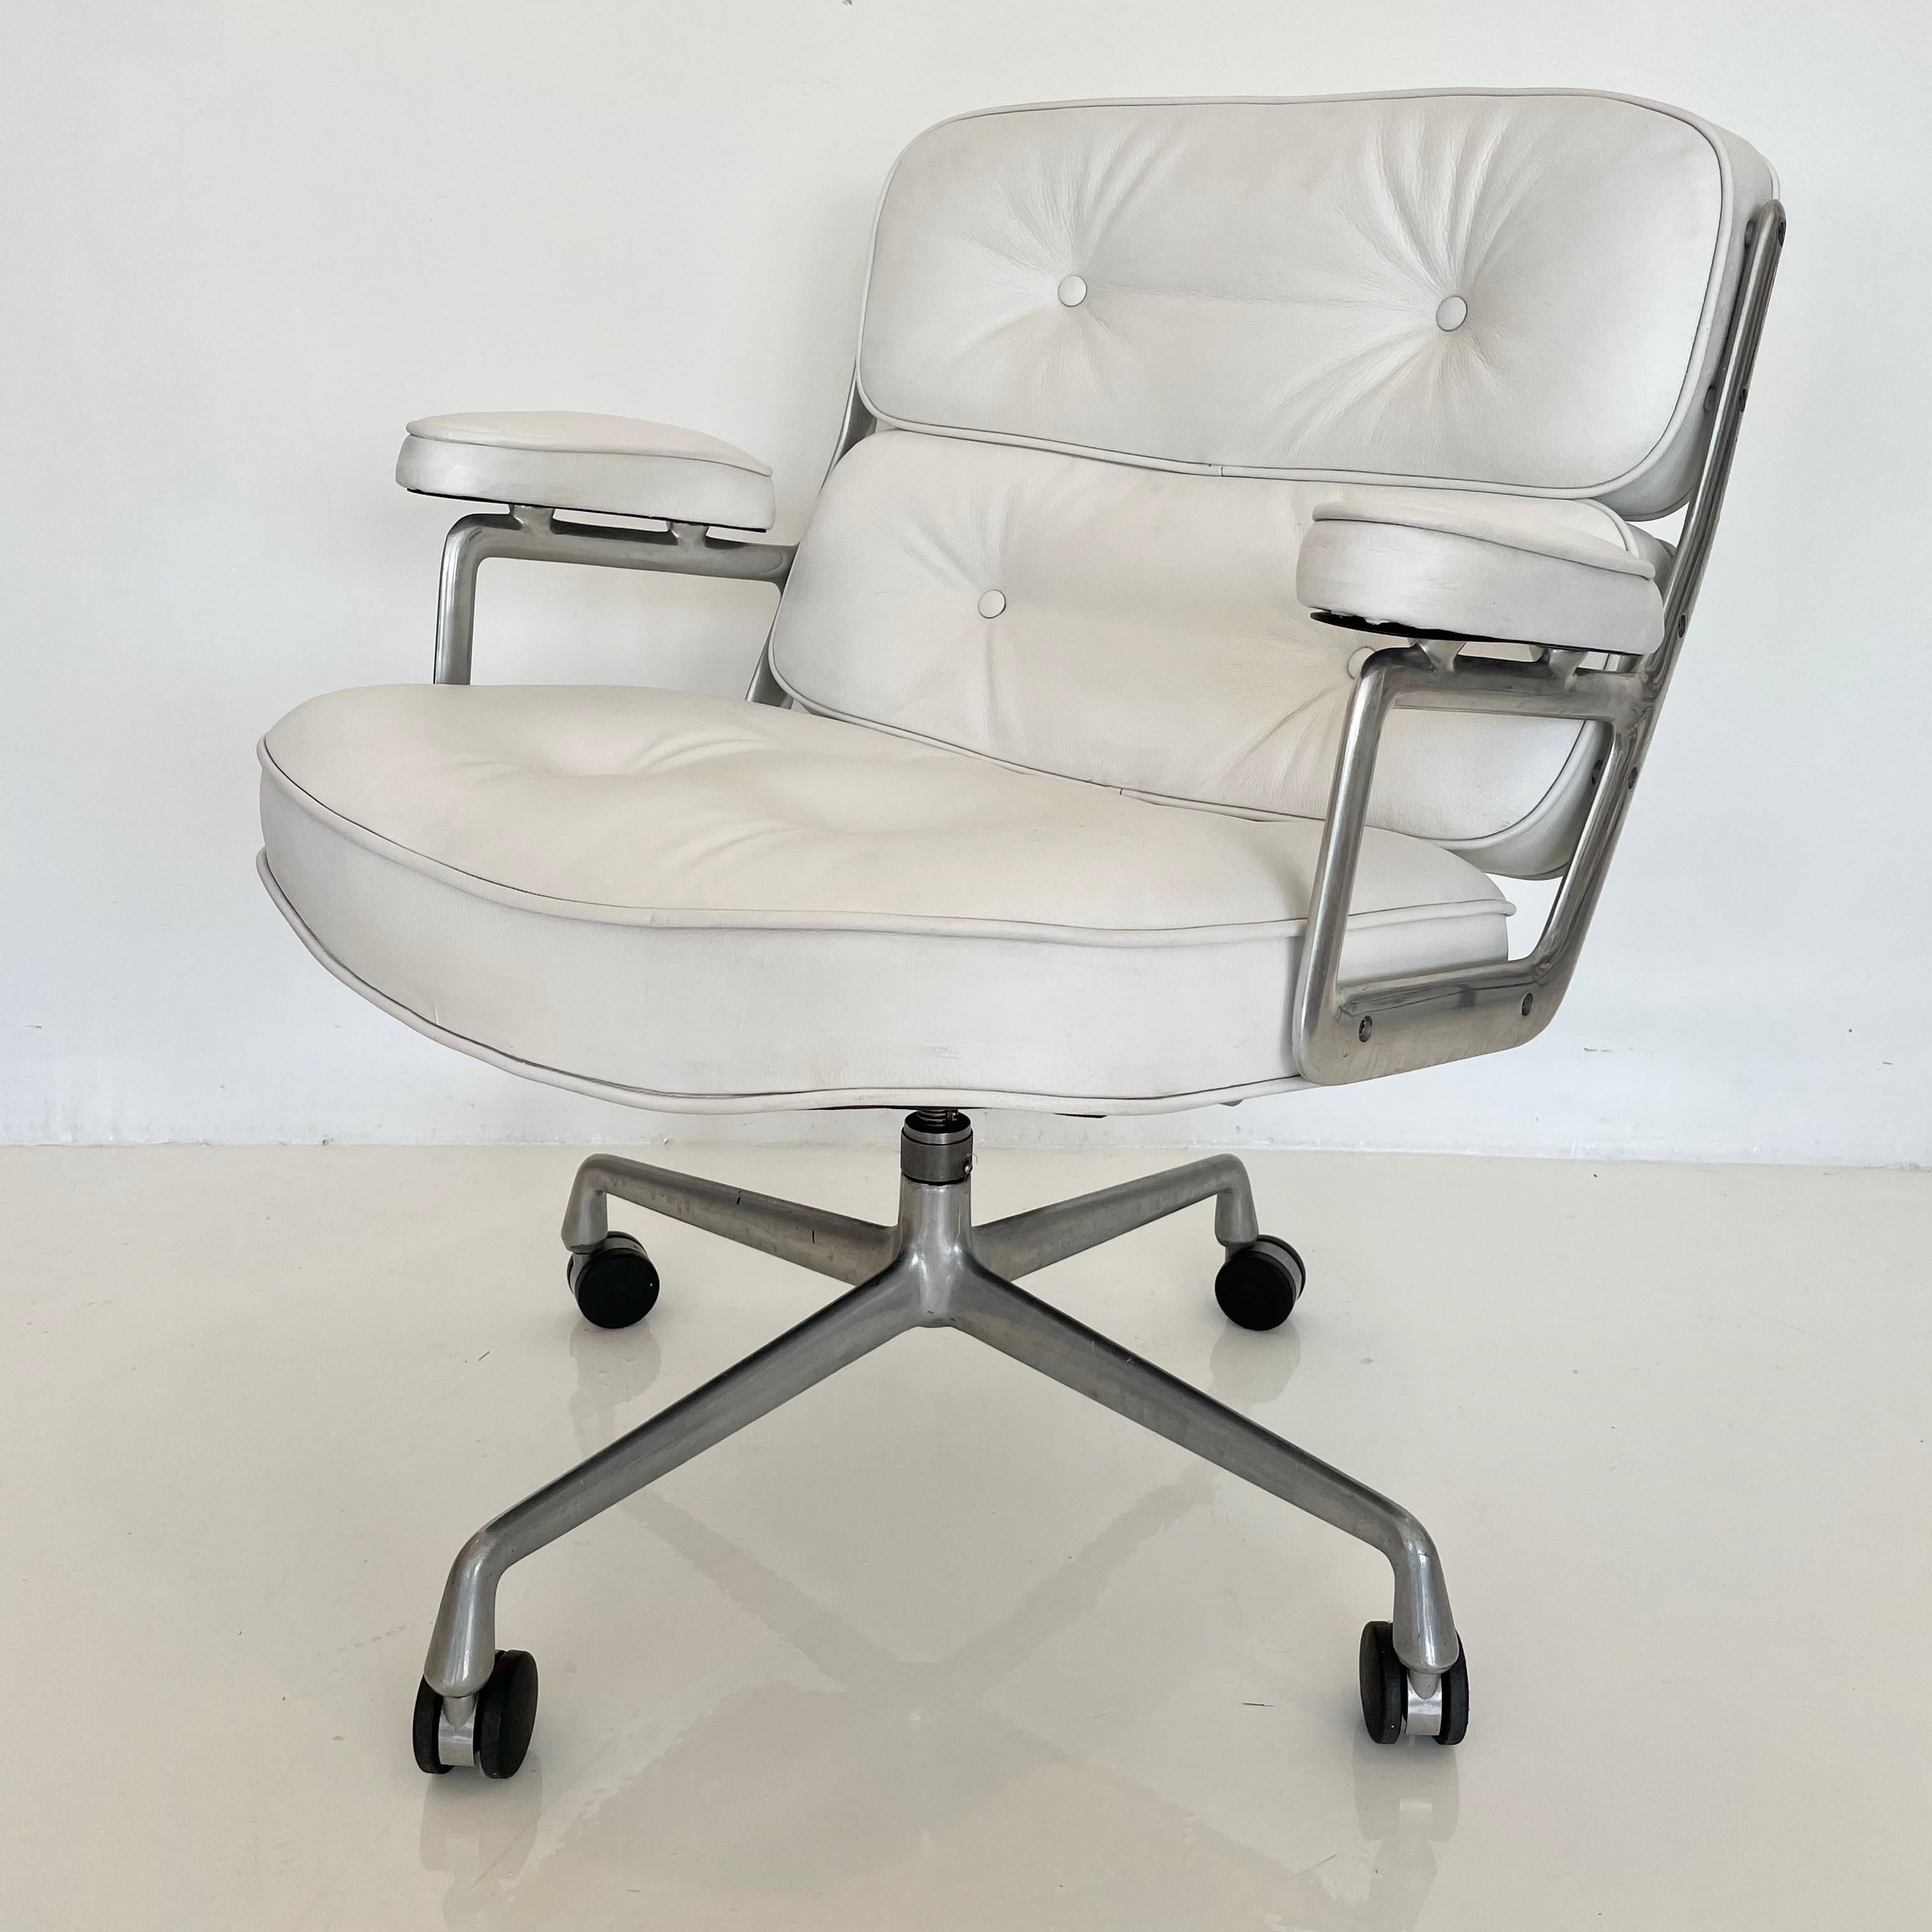 Original Eames Time Life Chair in White Leather 5